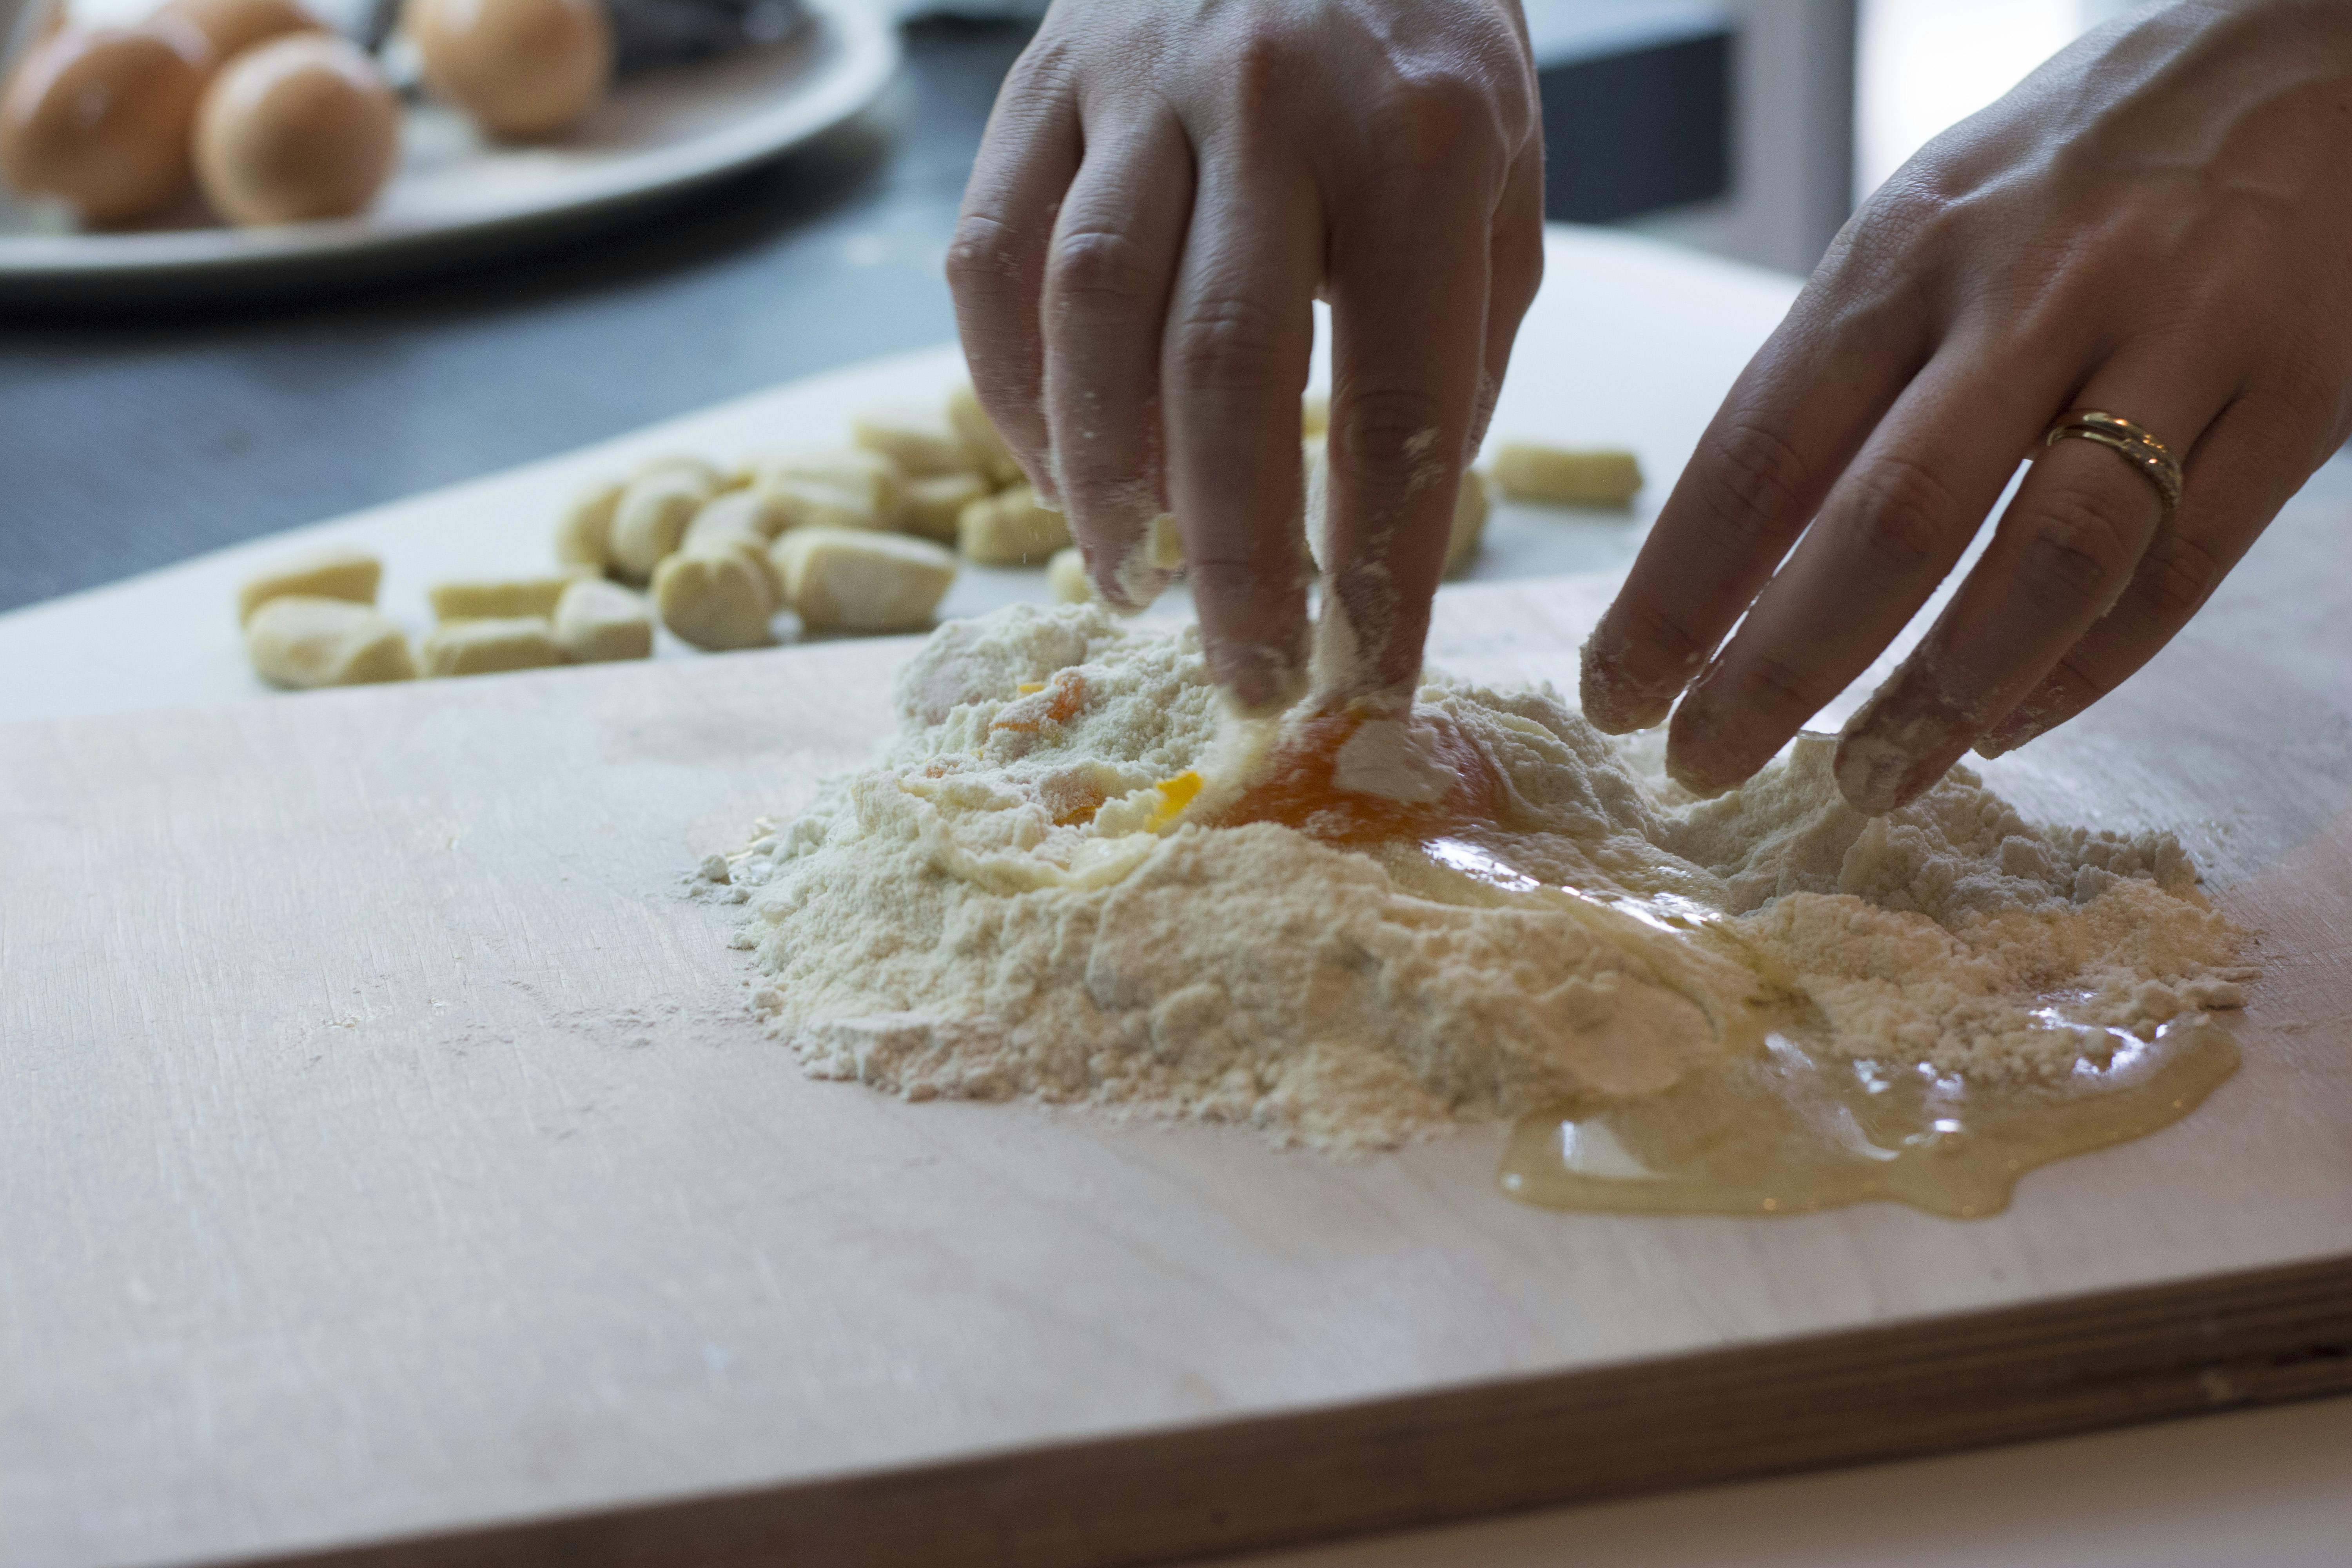 1-hour pasta making class in Rome